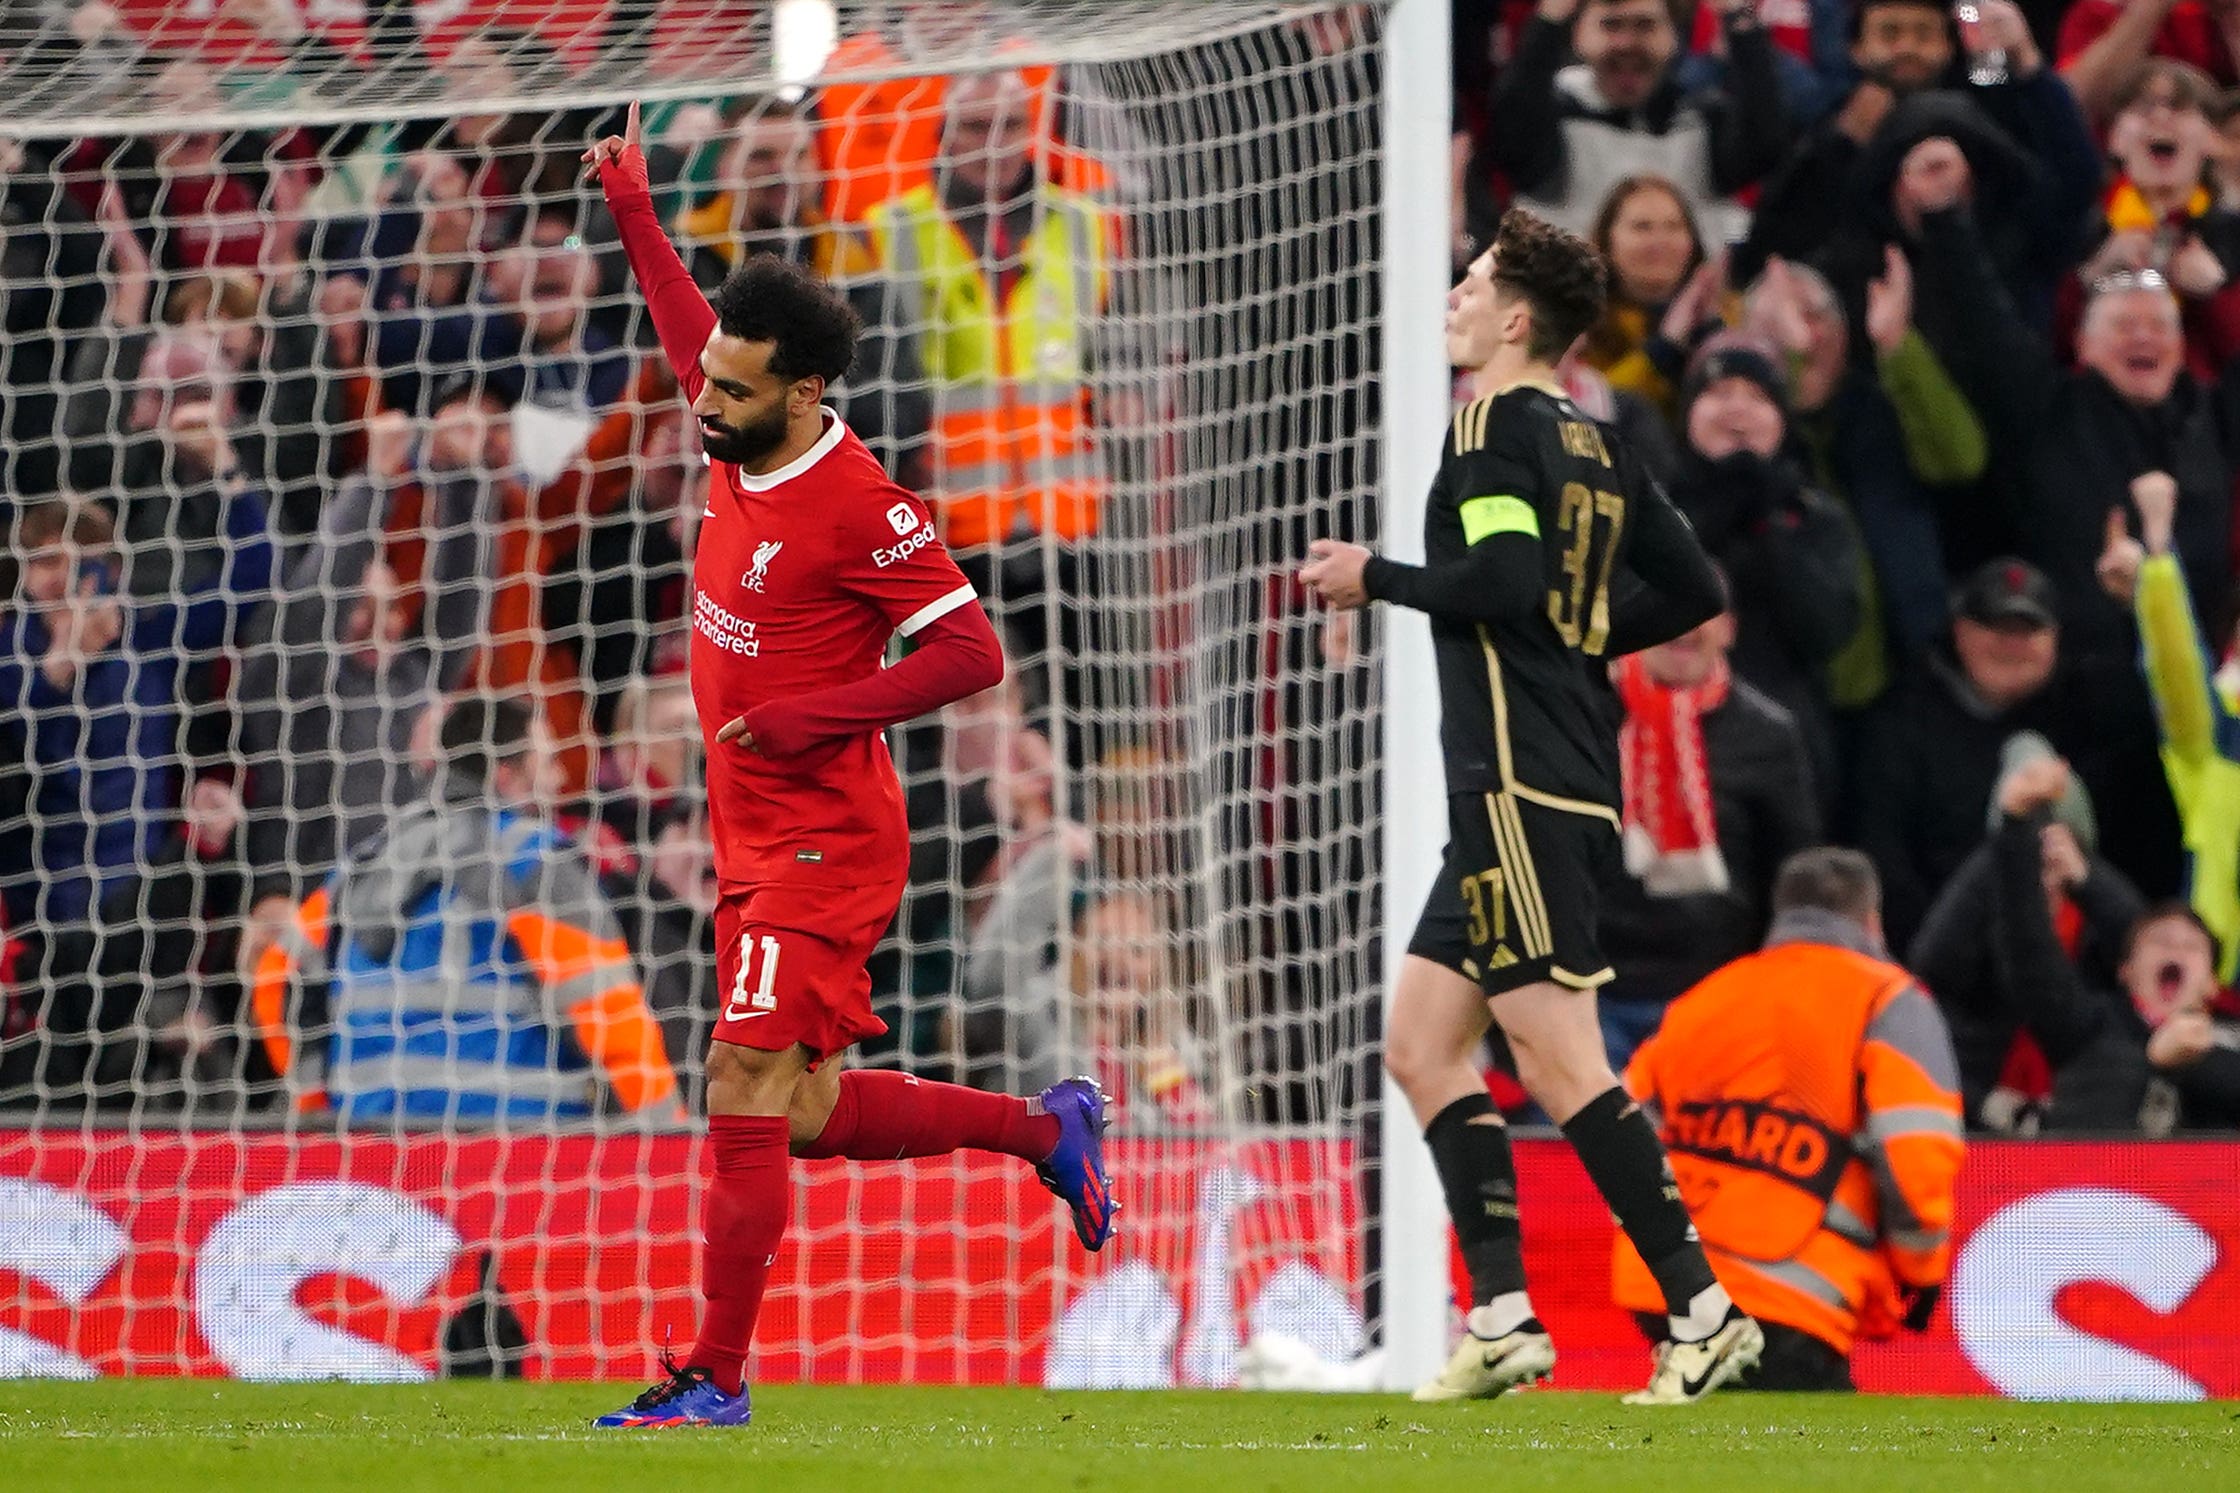 Mohamed Salah scored Liverpool’s third goal on Thursday night for his 20th of the campaign